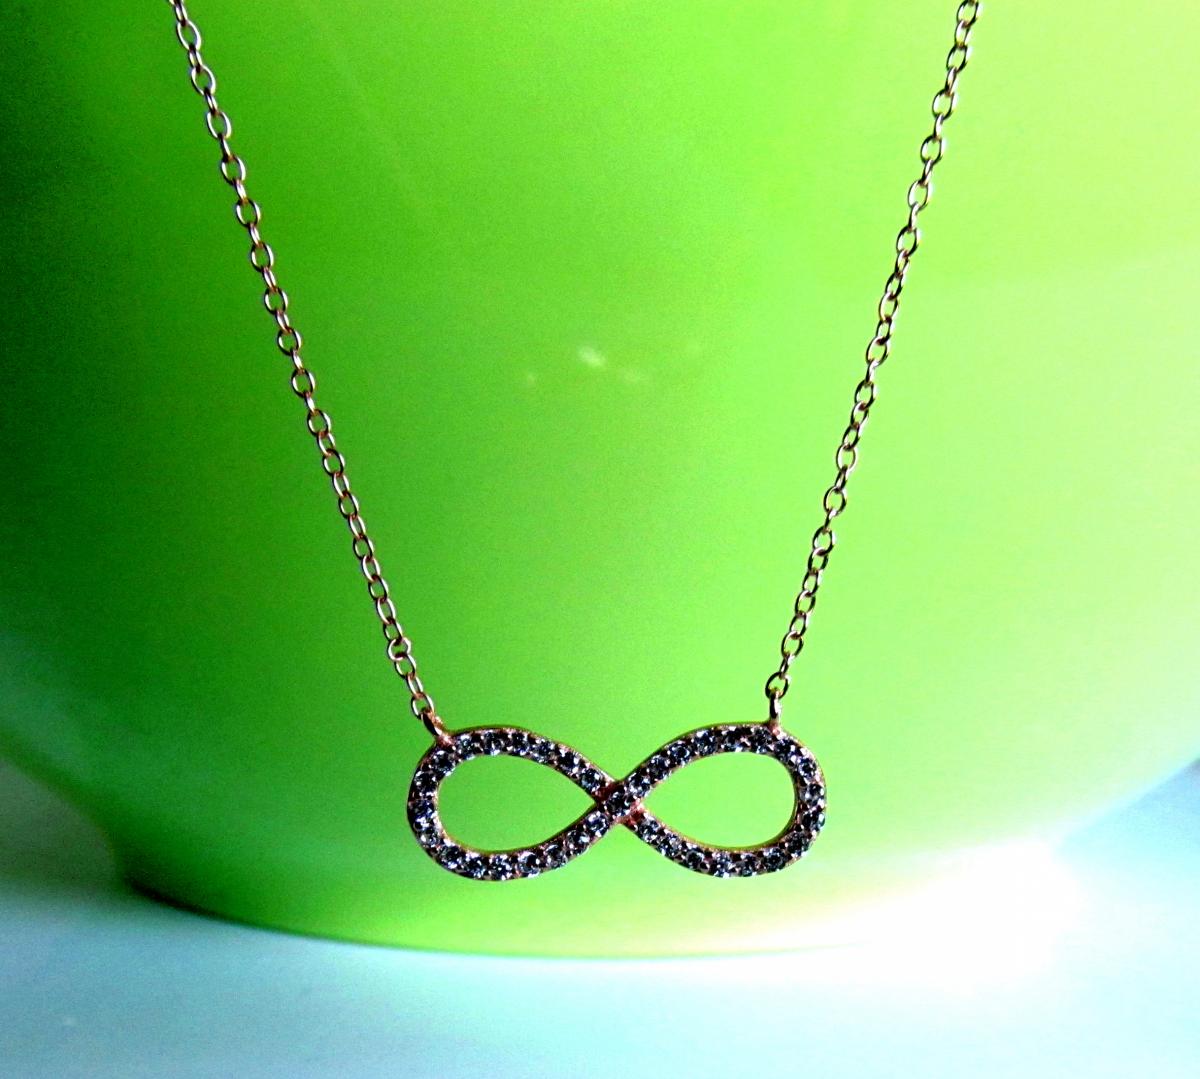 Cz Infinity Necklace-rose Gold Over 925 Sterling Silver Necklace With Cz On 16+2 Cable Chain